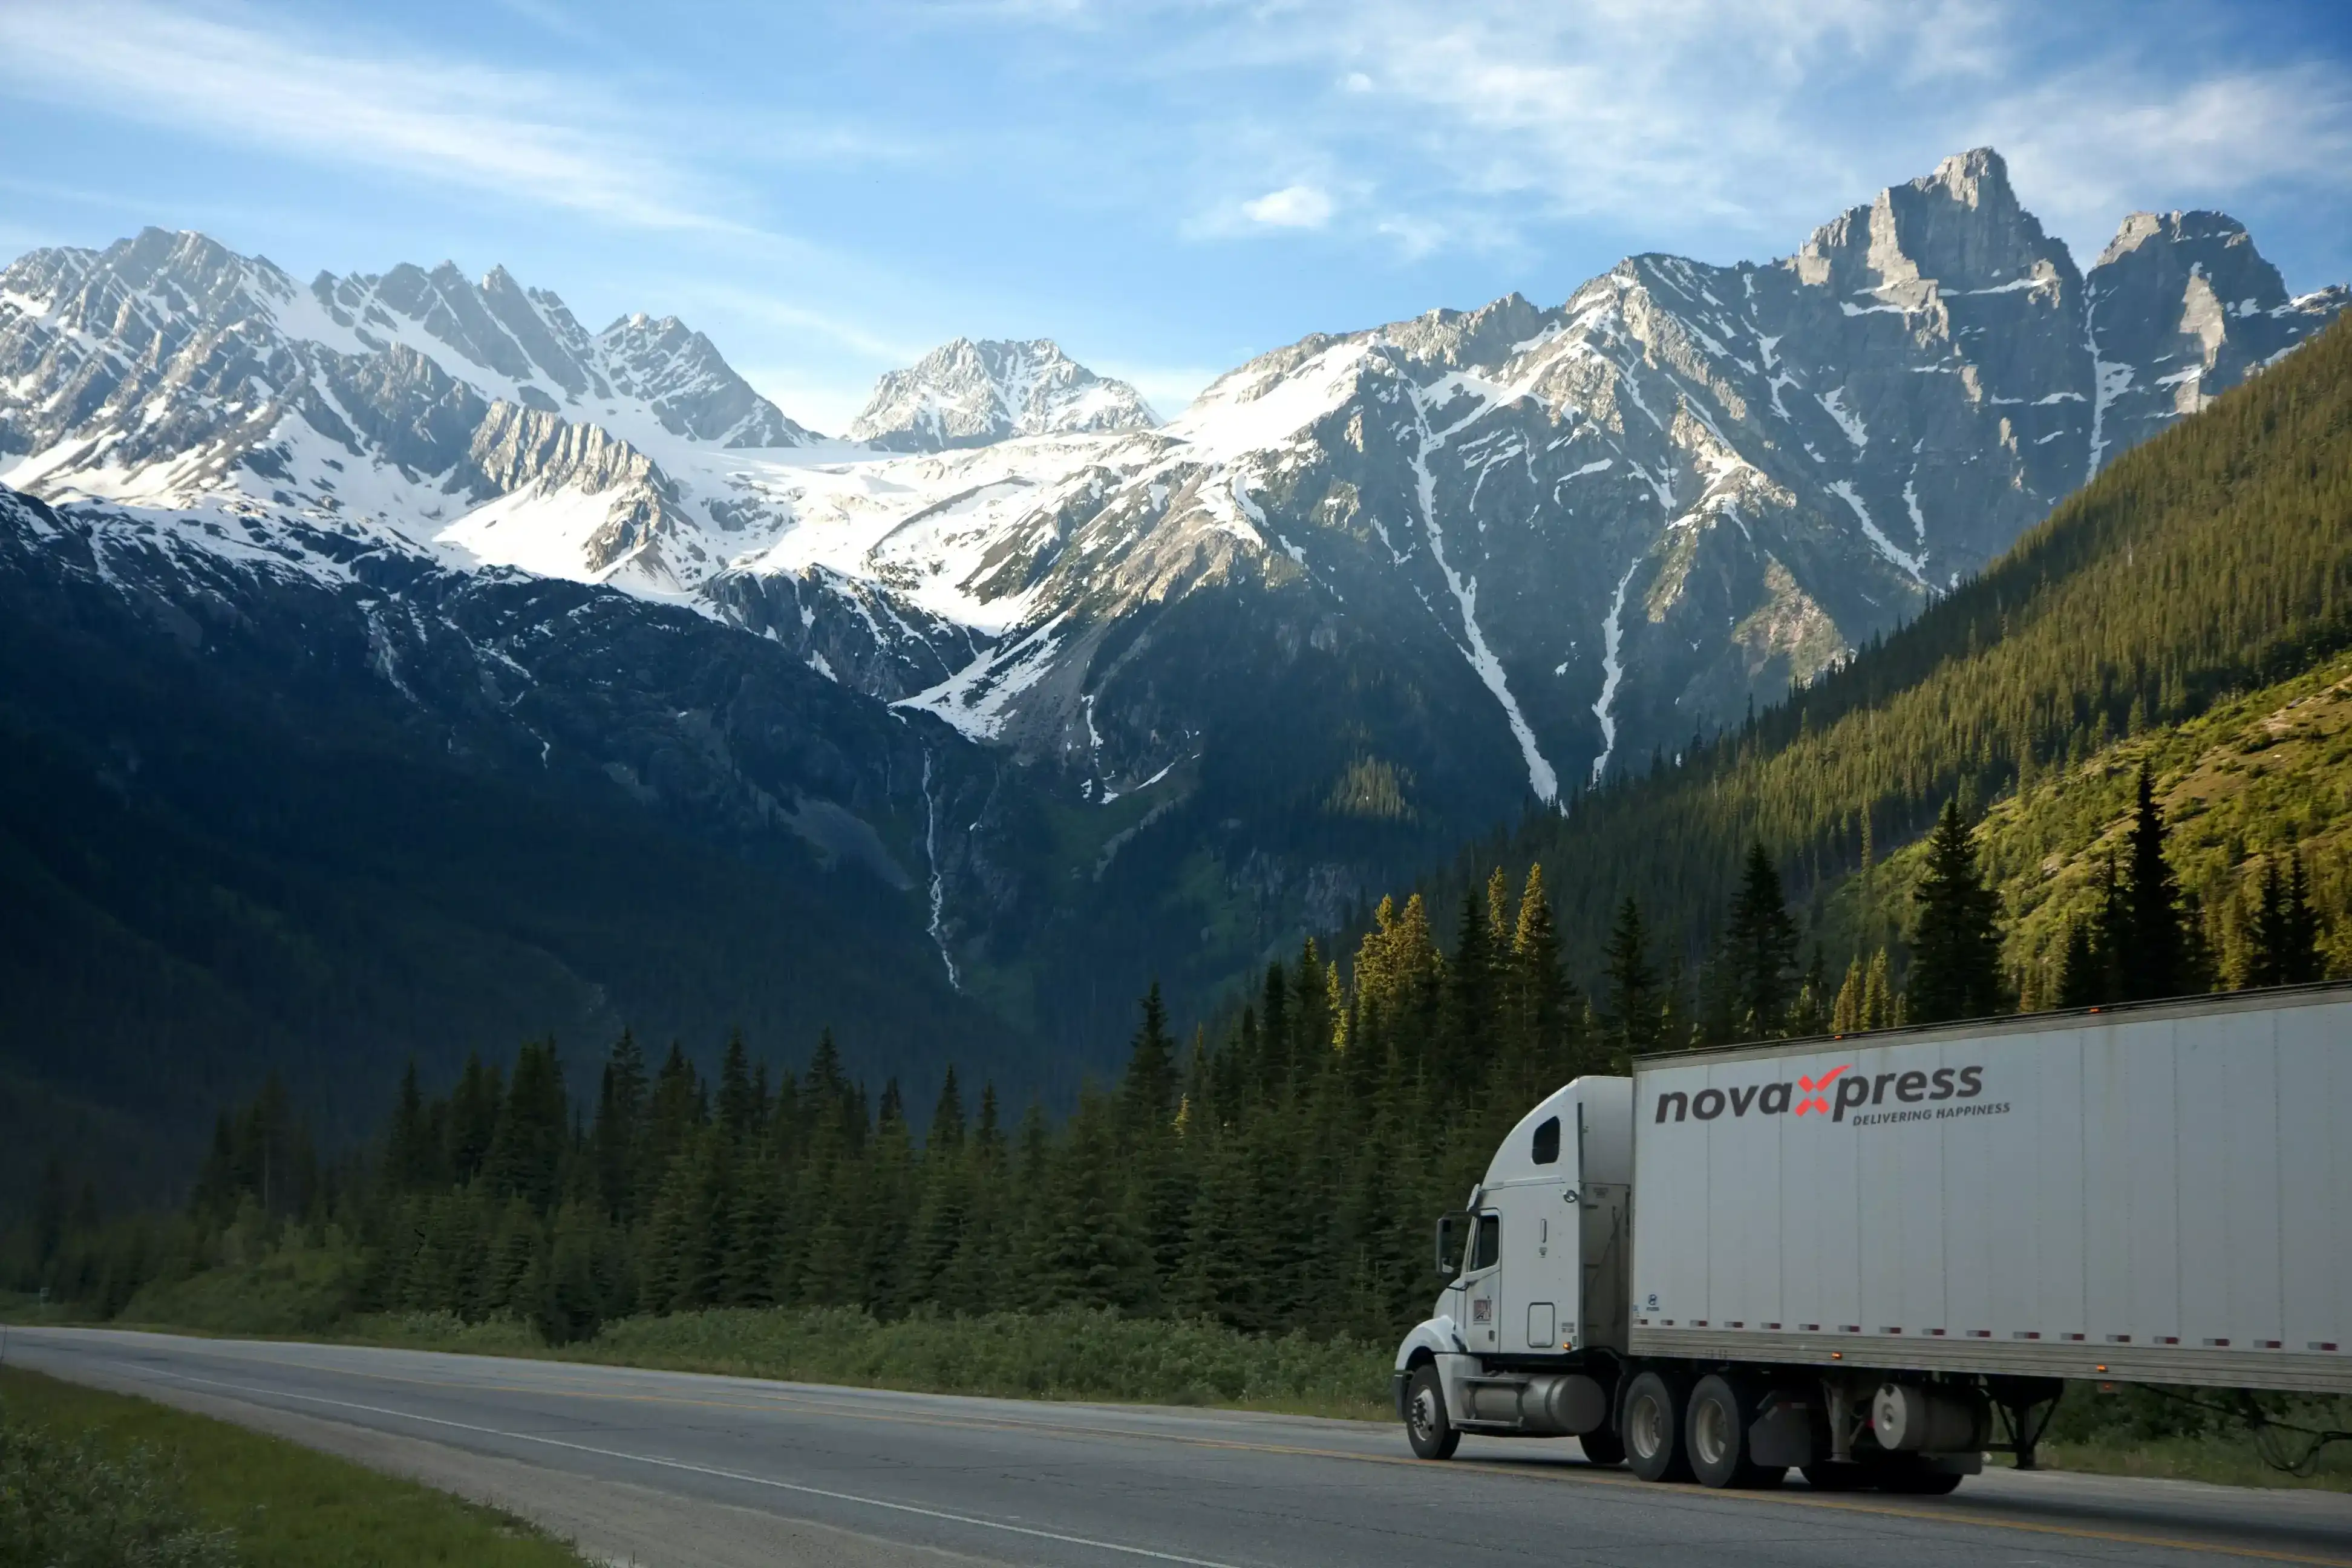 A semi truck driving on a road with mountains in the background.